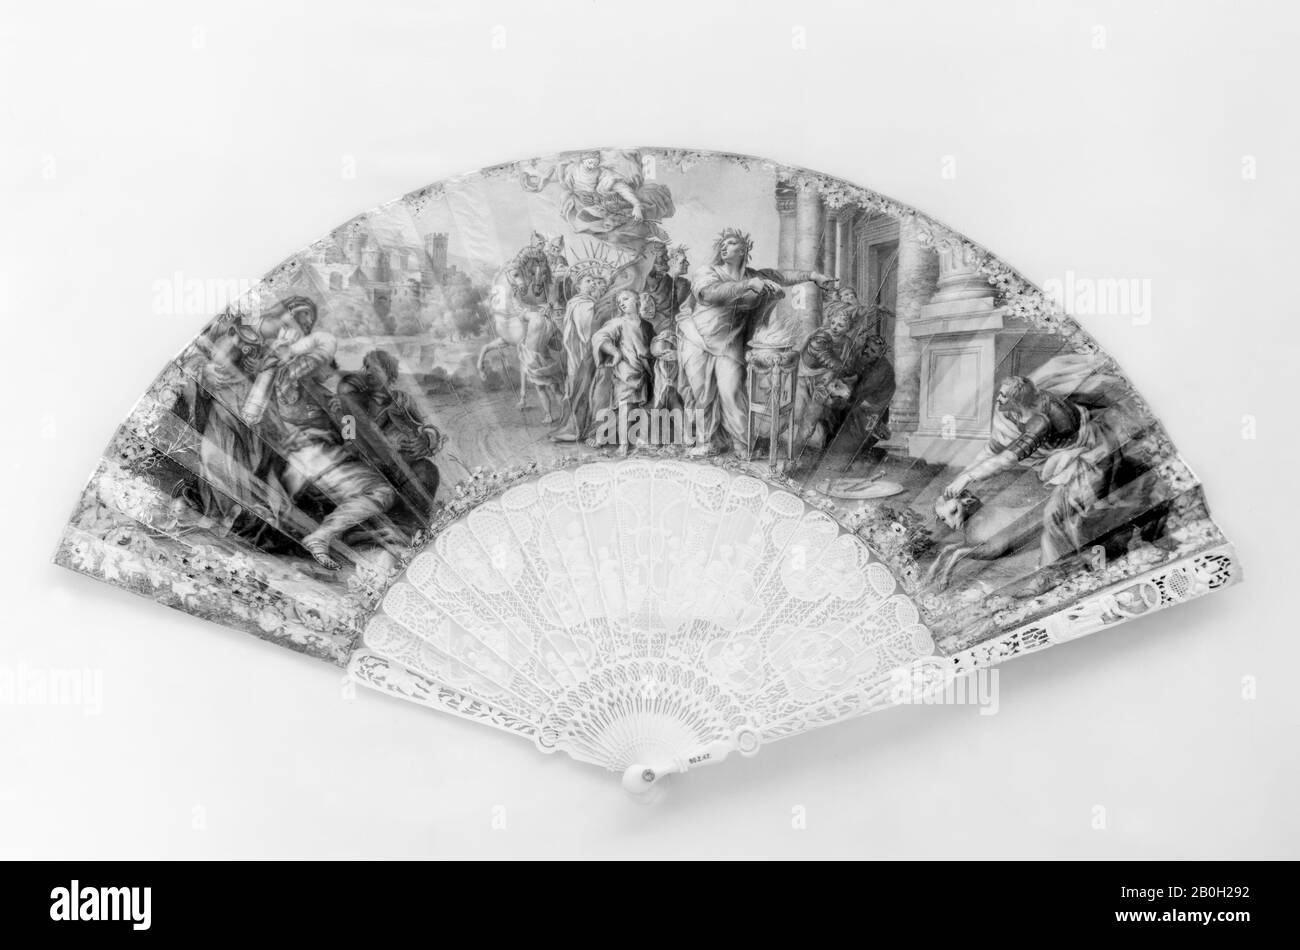 Fan, French, 18th century, French, Kid, ivory, 11 7/8 x 21 3/4 in. (30.2 x 55.2 cm), Fans Stock Photo